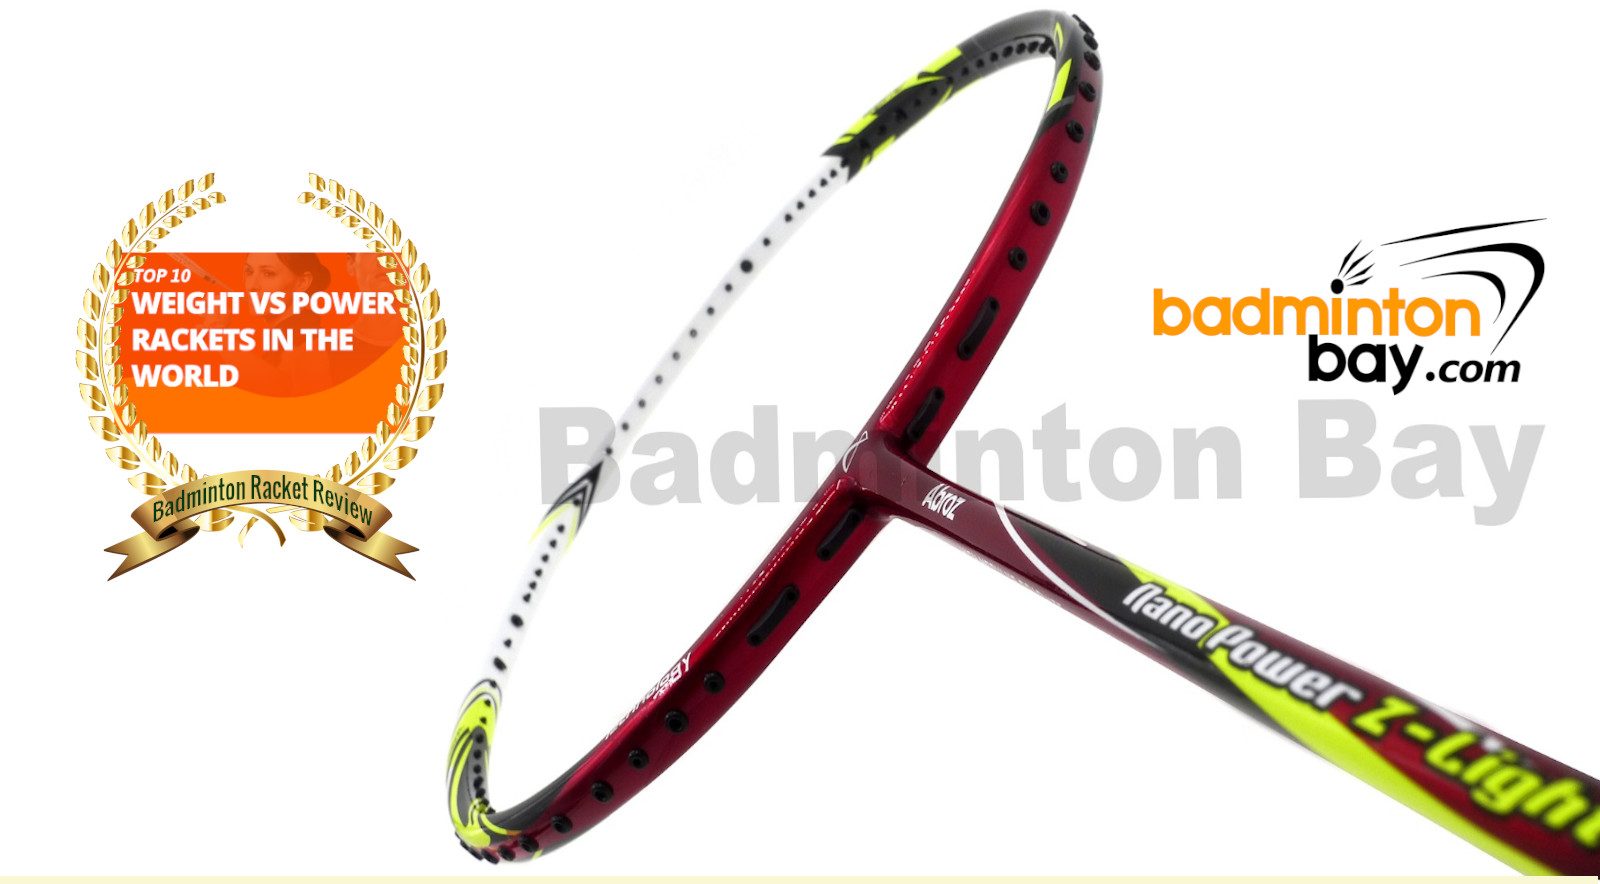 Review On Abrozs First Ever Badminton Racket, The Abroz Nano Power Z-Light And Why Its Still Selling Like Hot Cakes!